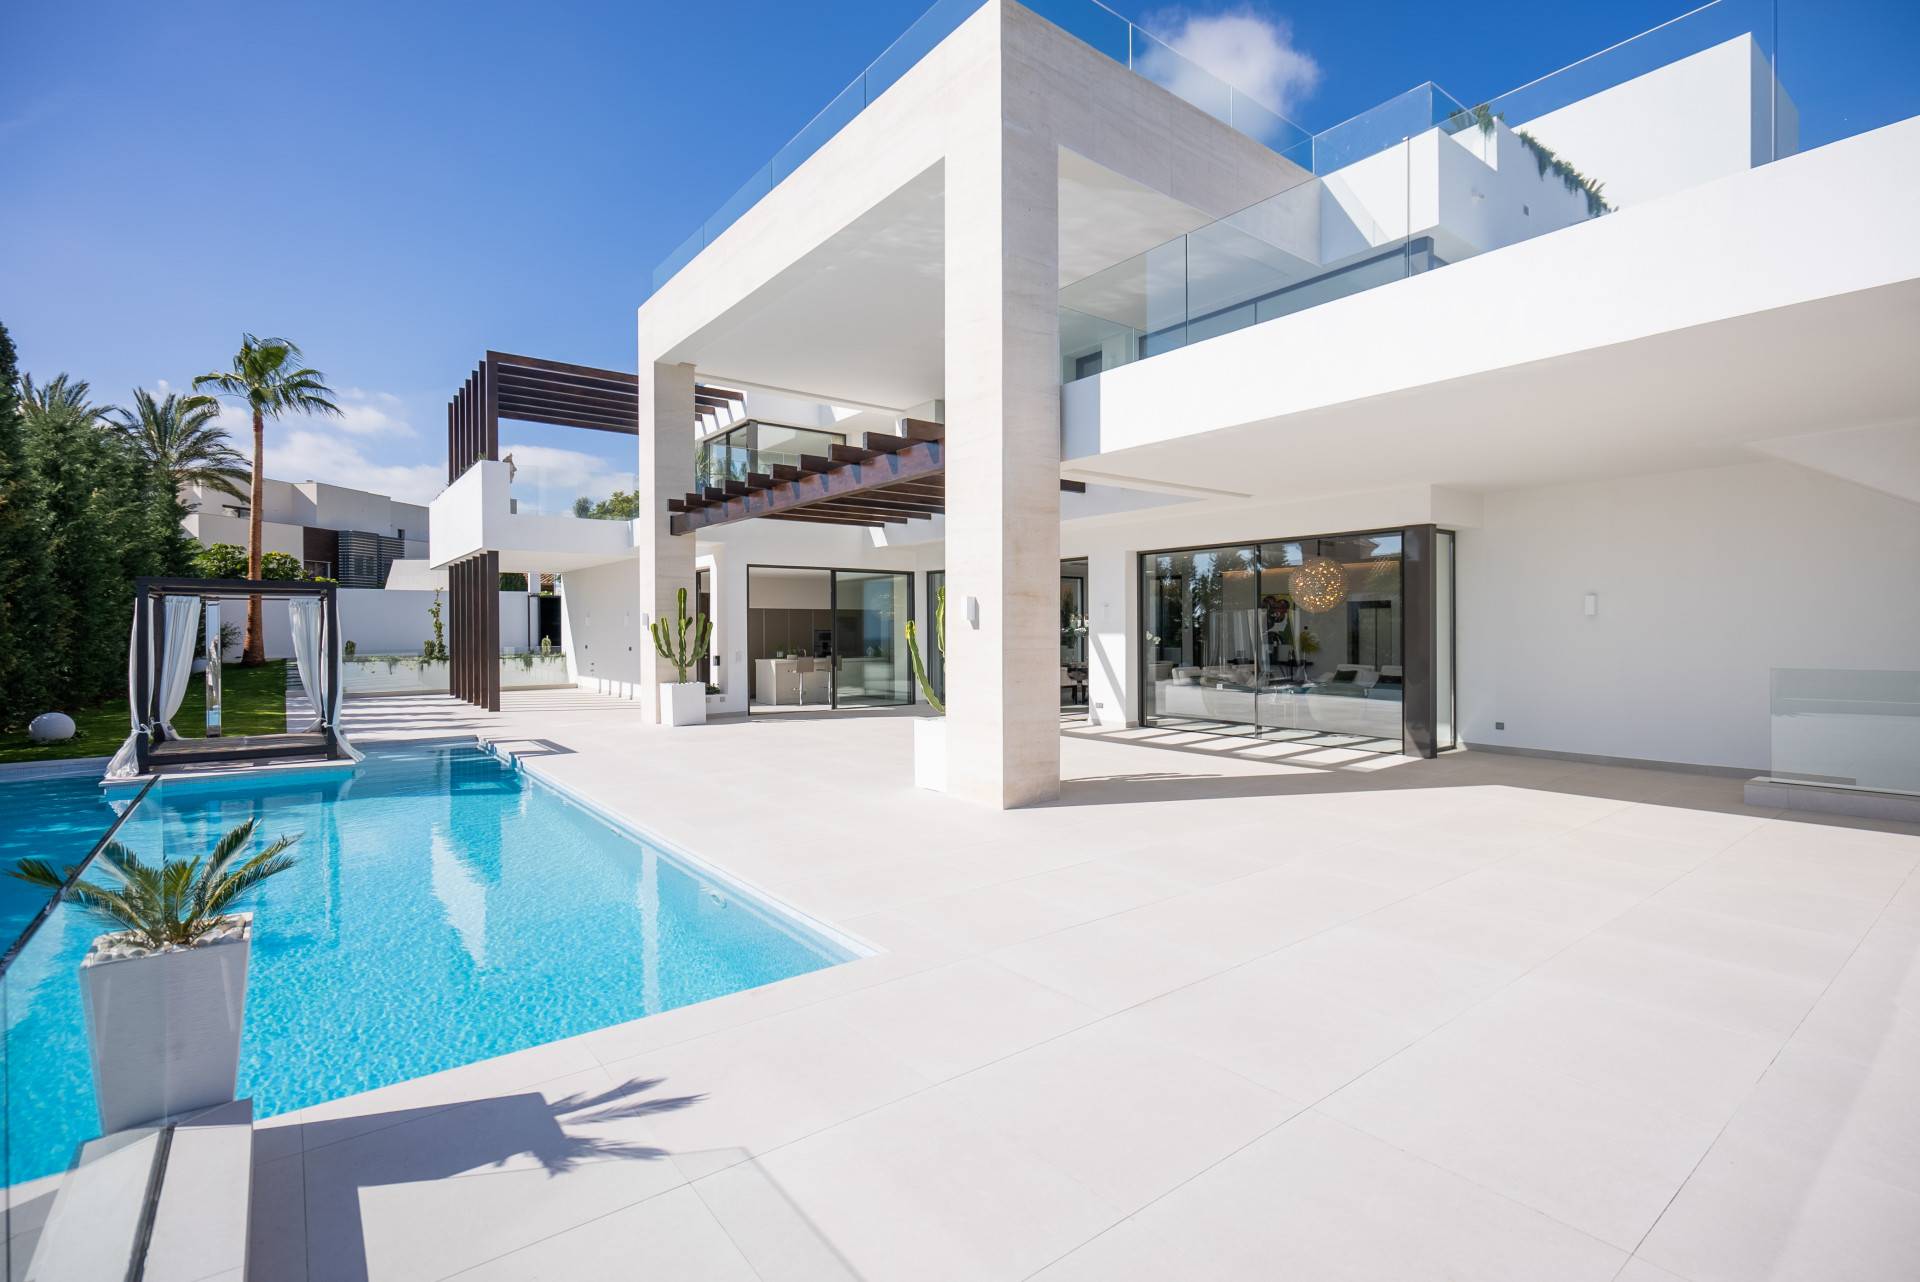 Finished at the end of 2020, this spectacular, contemporary style villa is all about modern chic and high quality.